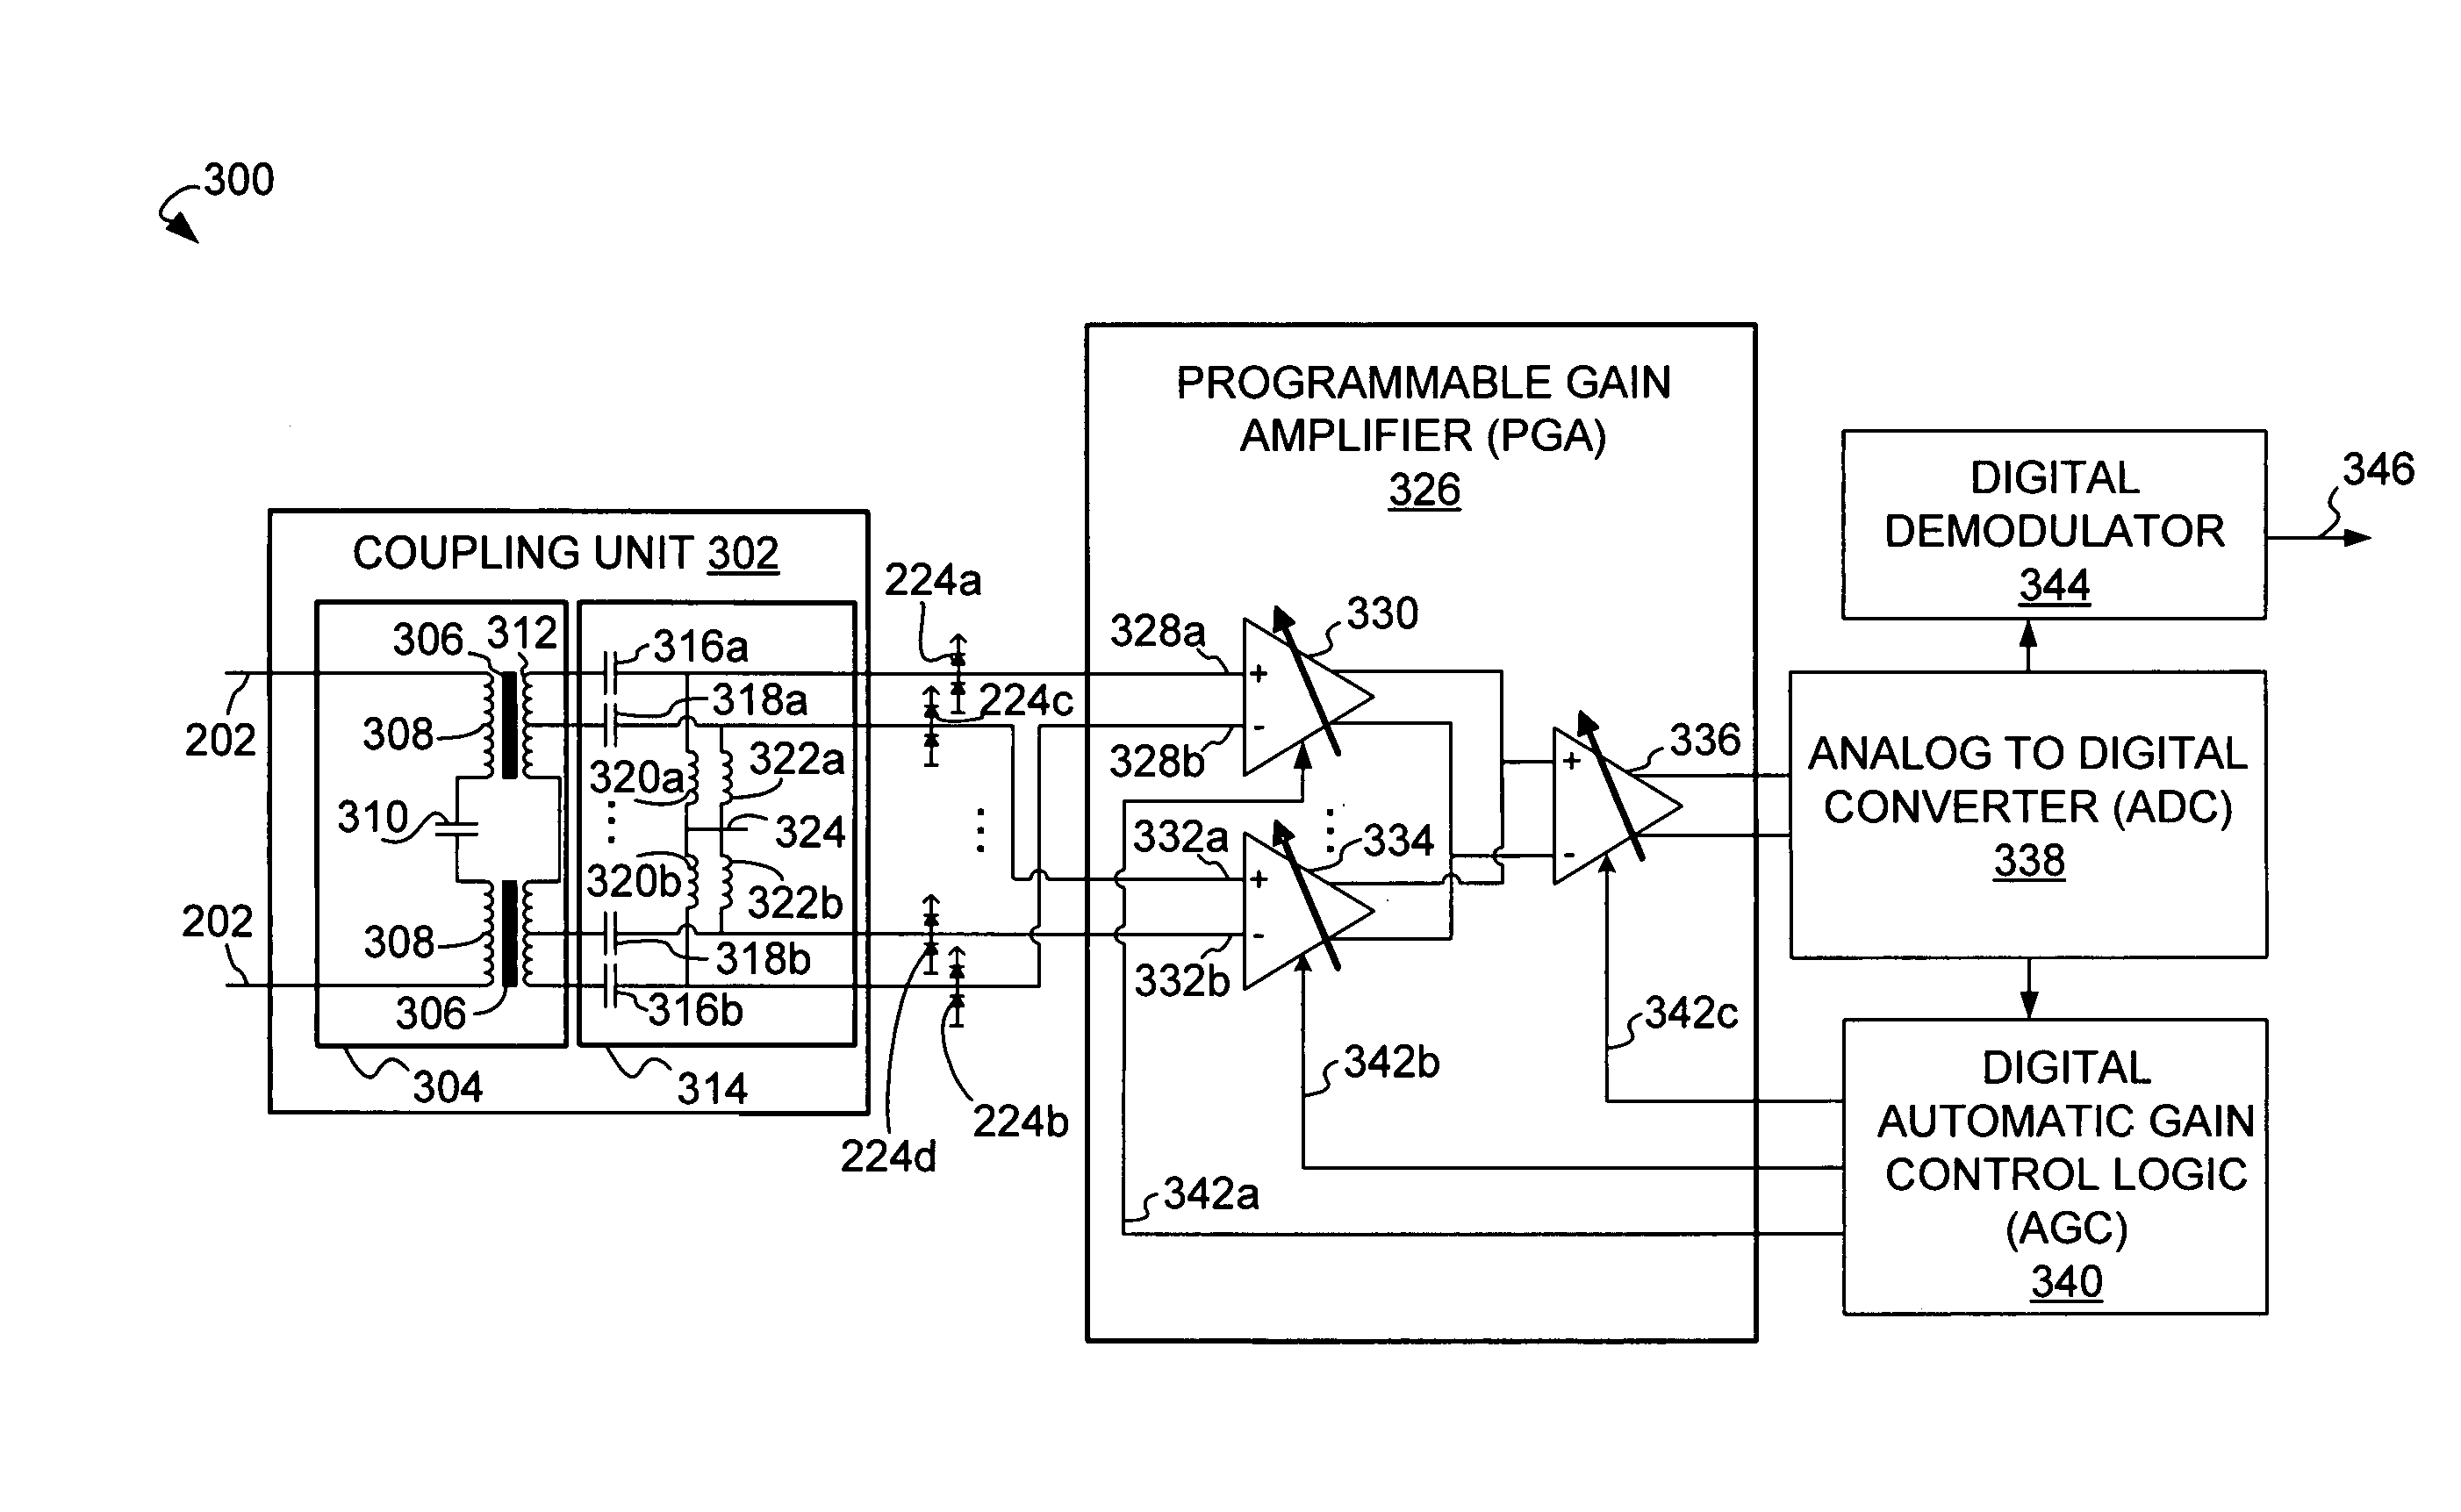 Coupling signal processing circuitry with a wireline communications medium